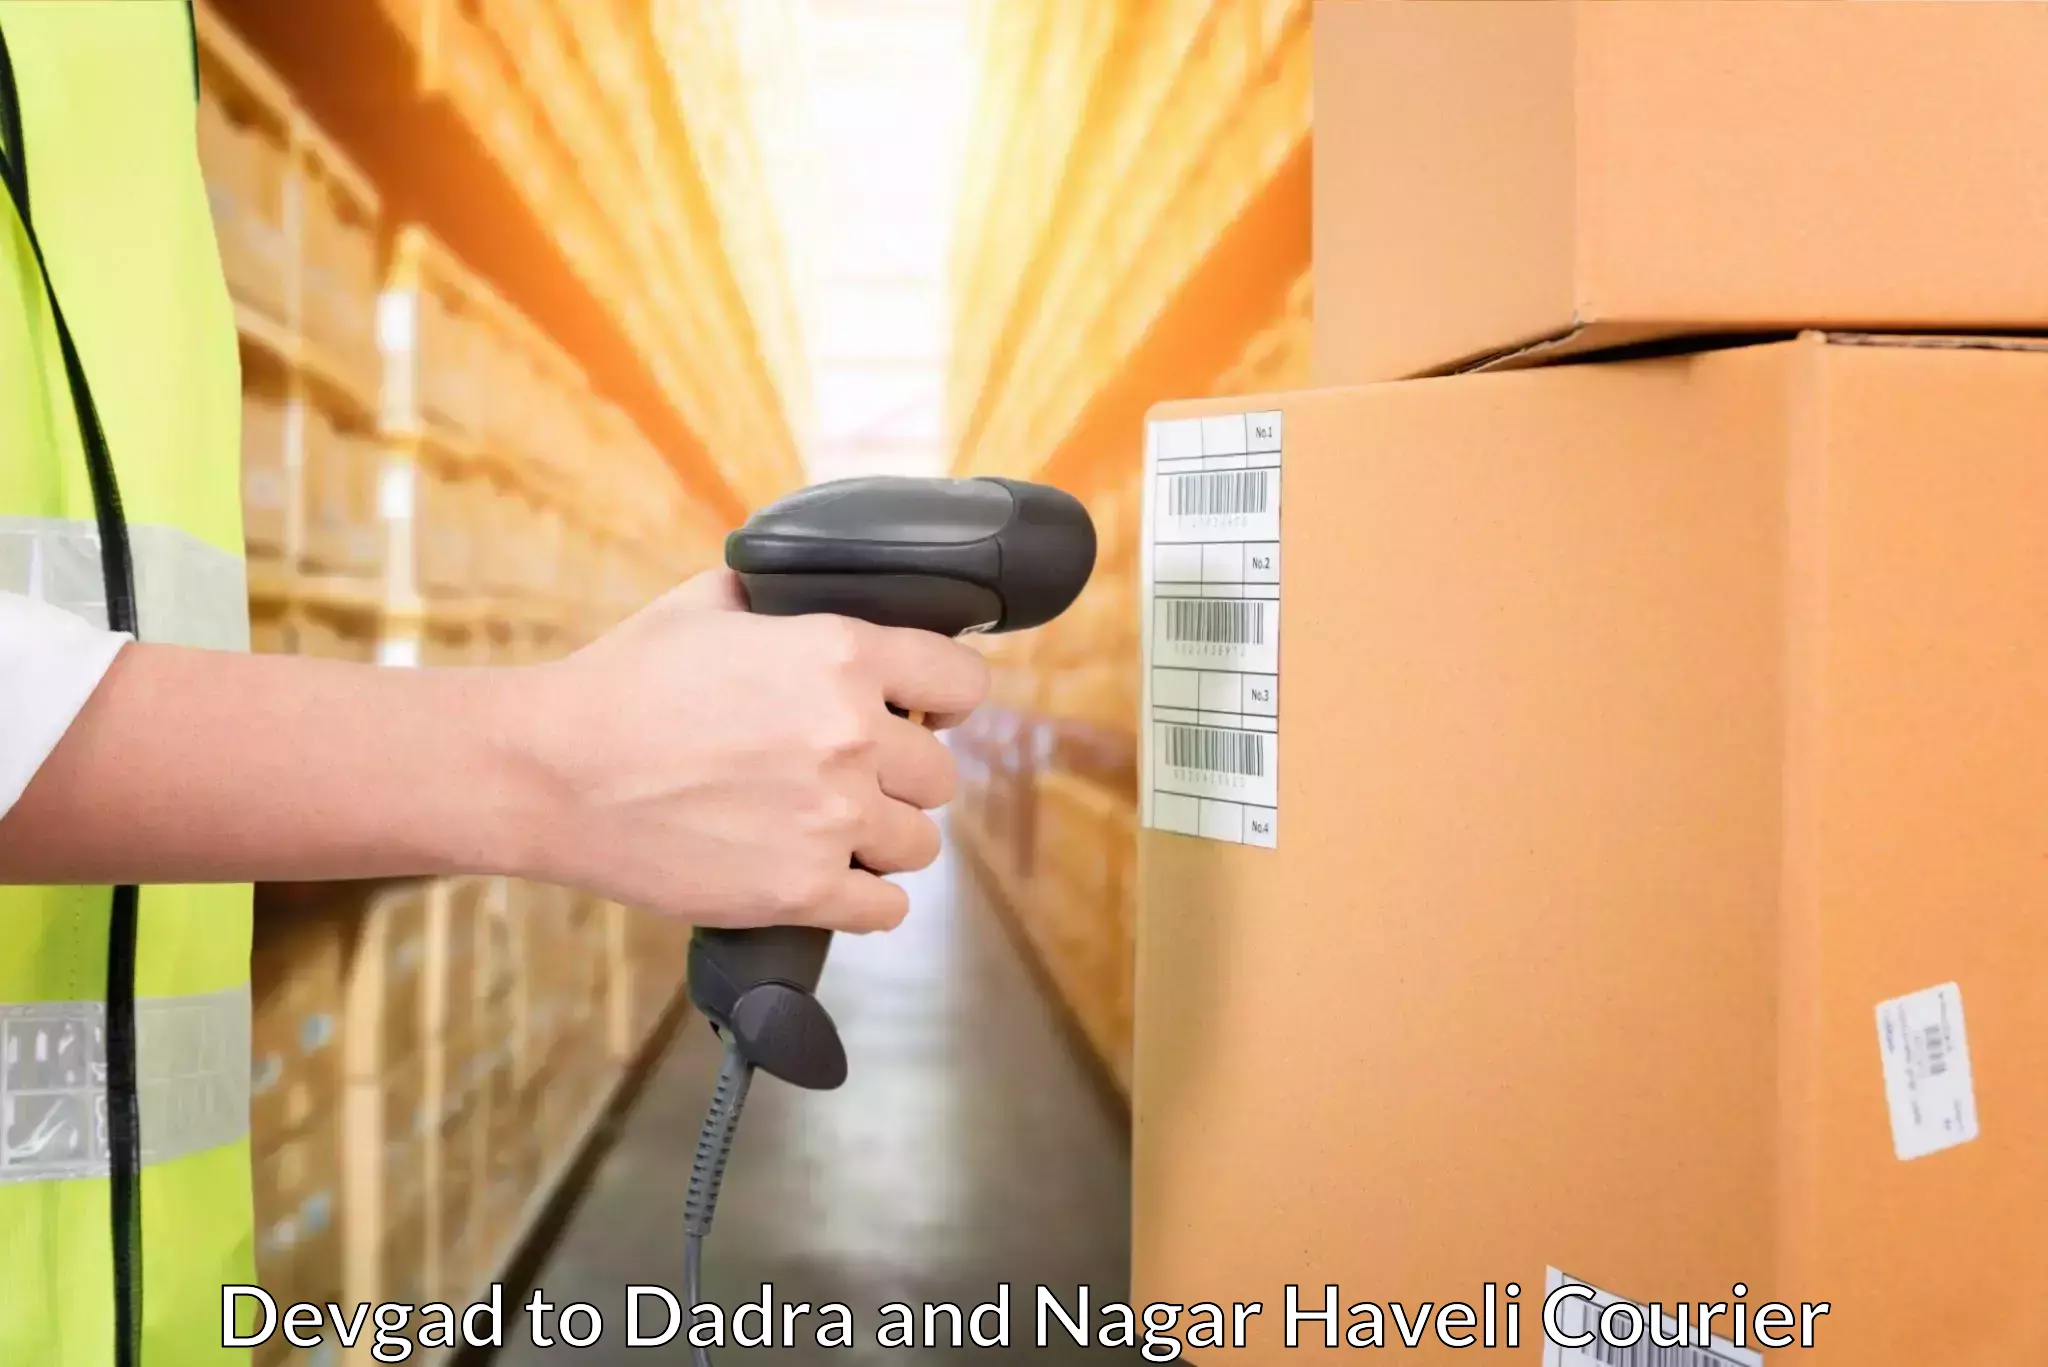 Full-service courier options in Devgad to Dadra and Nagar Haveli